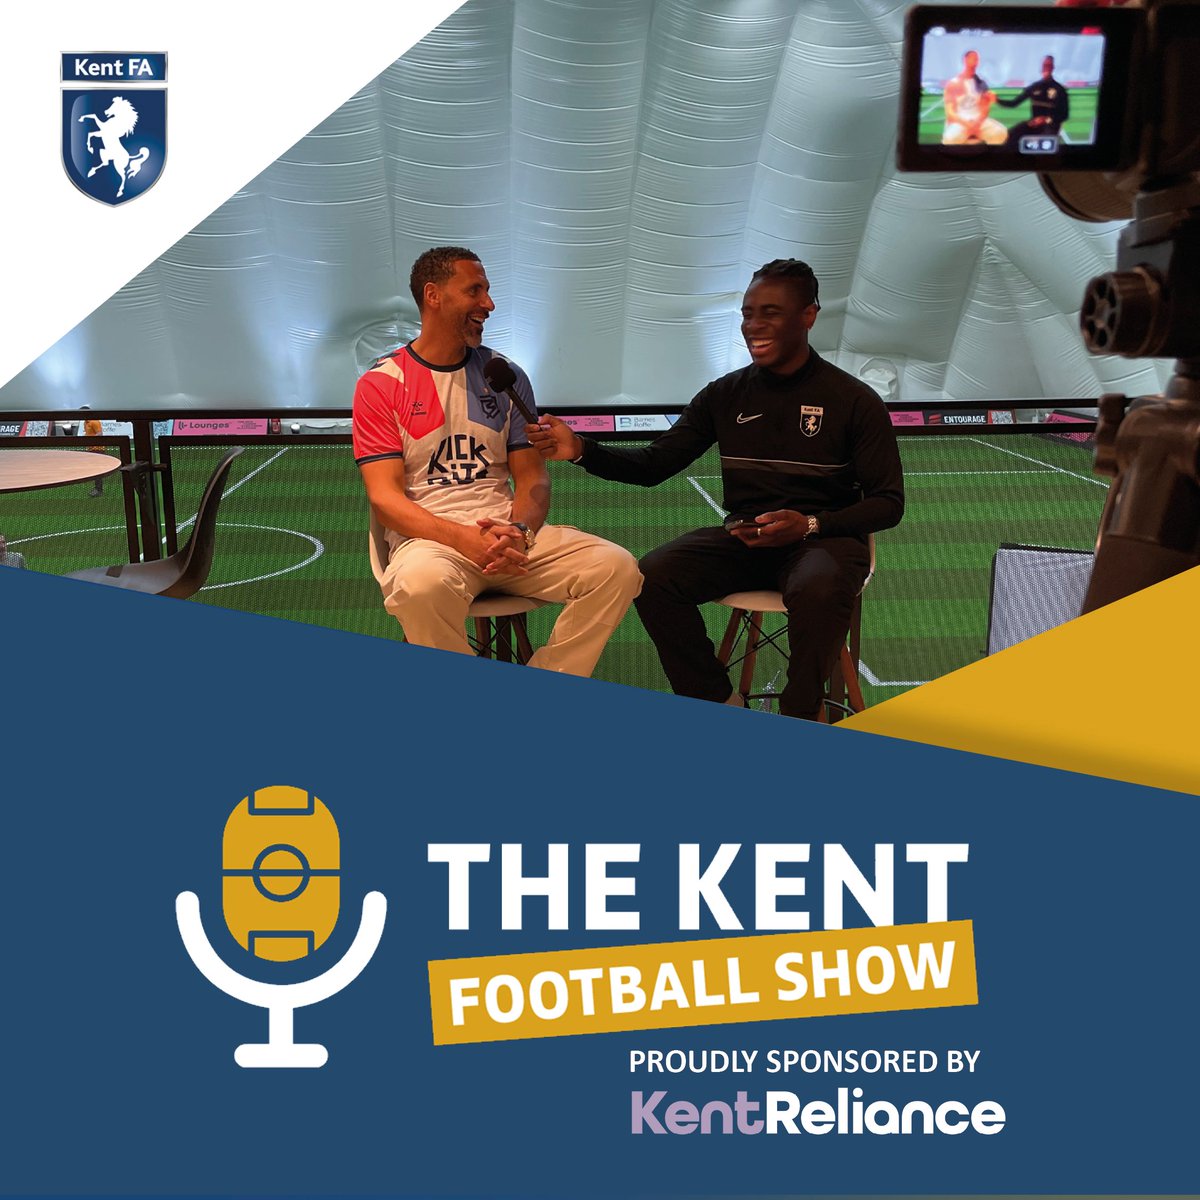 THE KENT FOOTBALL SHOW📽️ | The countdown begins! #Episode 5 of The Kent Football Show, sponsored by @kentreliance goes live on youtube.com/@TheKentFA next week! 📅Save the date: Thursday 30th May 2024 ⏰Set your alarms: 2 pm